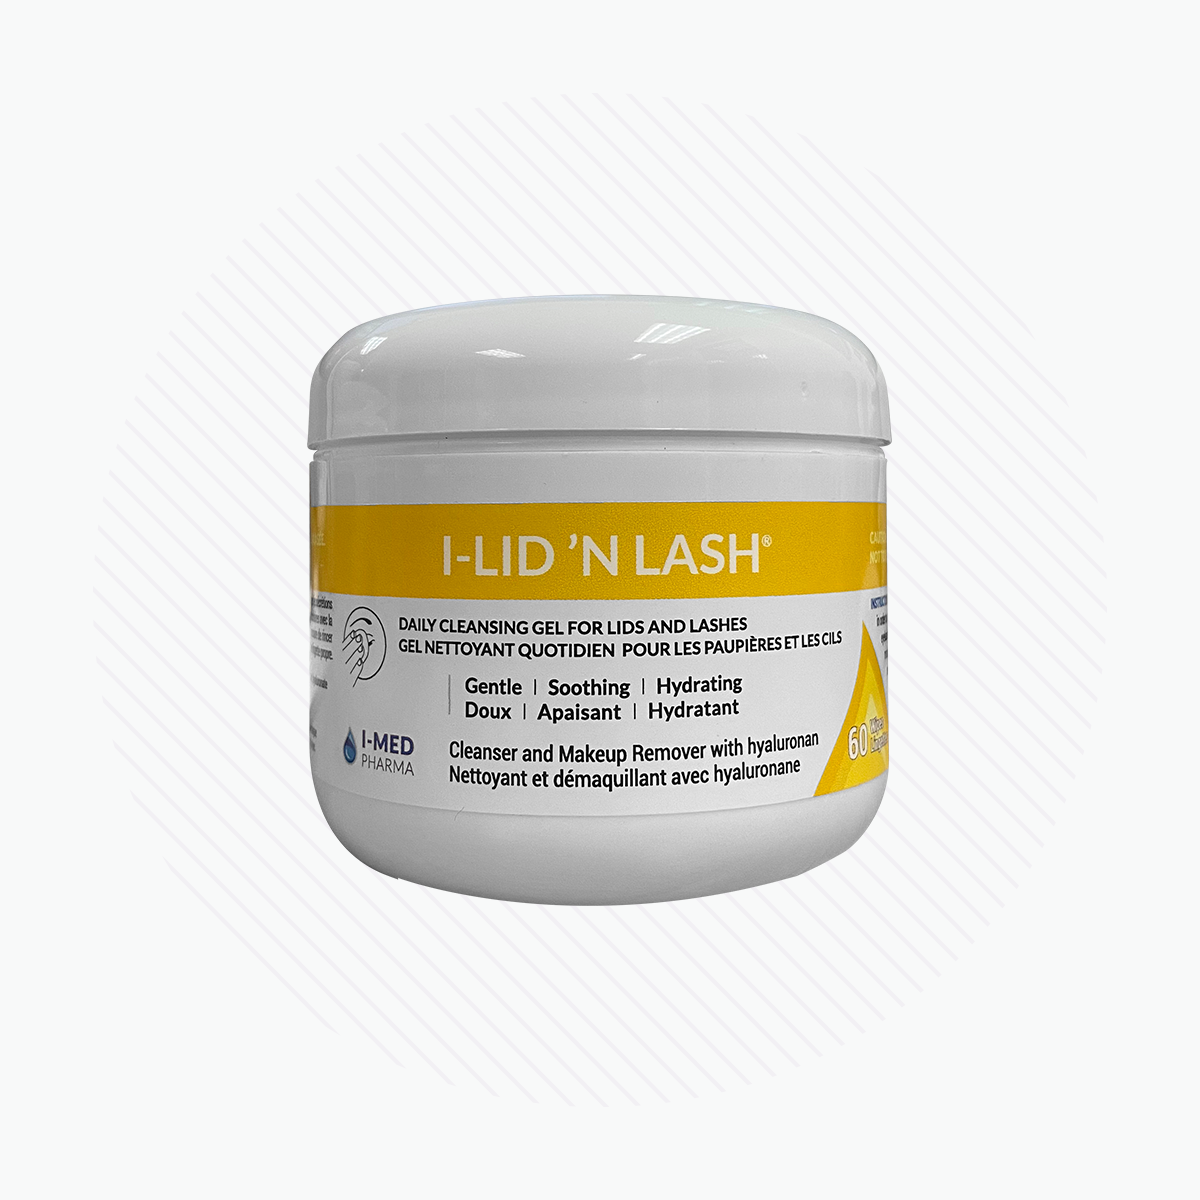 I-Lid ’n Lash Lid and Lash Hygiene Wipes to Cleanse and Hydrate (60 Wipes) 2 Month Supply